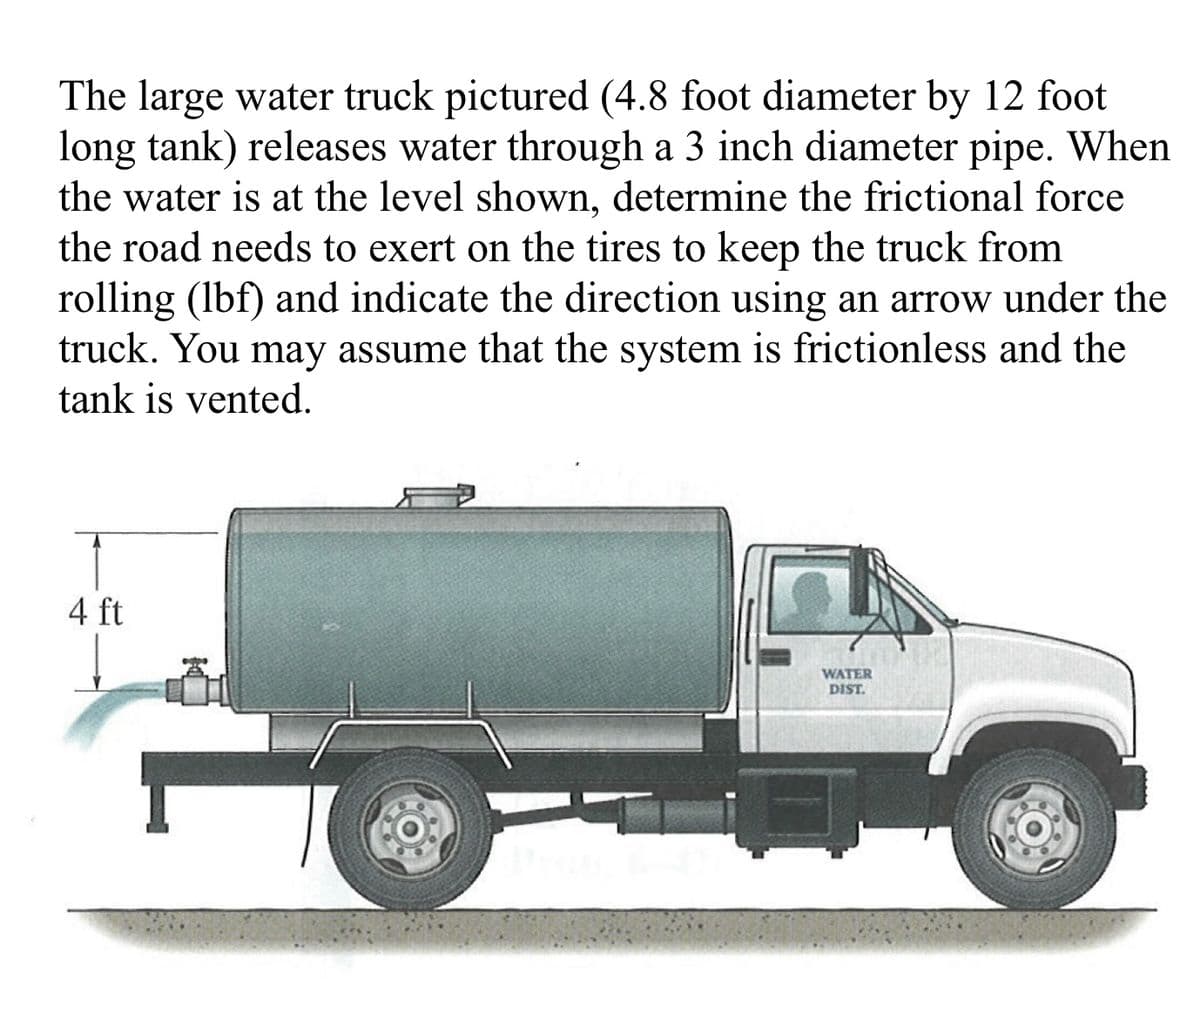 The large water truck pictured (4.8 foot diameter by 12 foot
long tank) releases water through a 3 inch diameter pipe. When
the water is at the level shown, determine the frictional force
the road needs to exert on the tires to keep the truck from
rolling (lbf) and indicate the direction using an arrow under the
truck. You may assume that the system is frictionless and the
tank is vented.
4 ft
WATER
DIST.